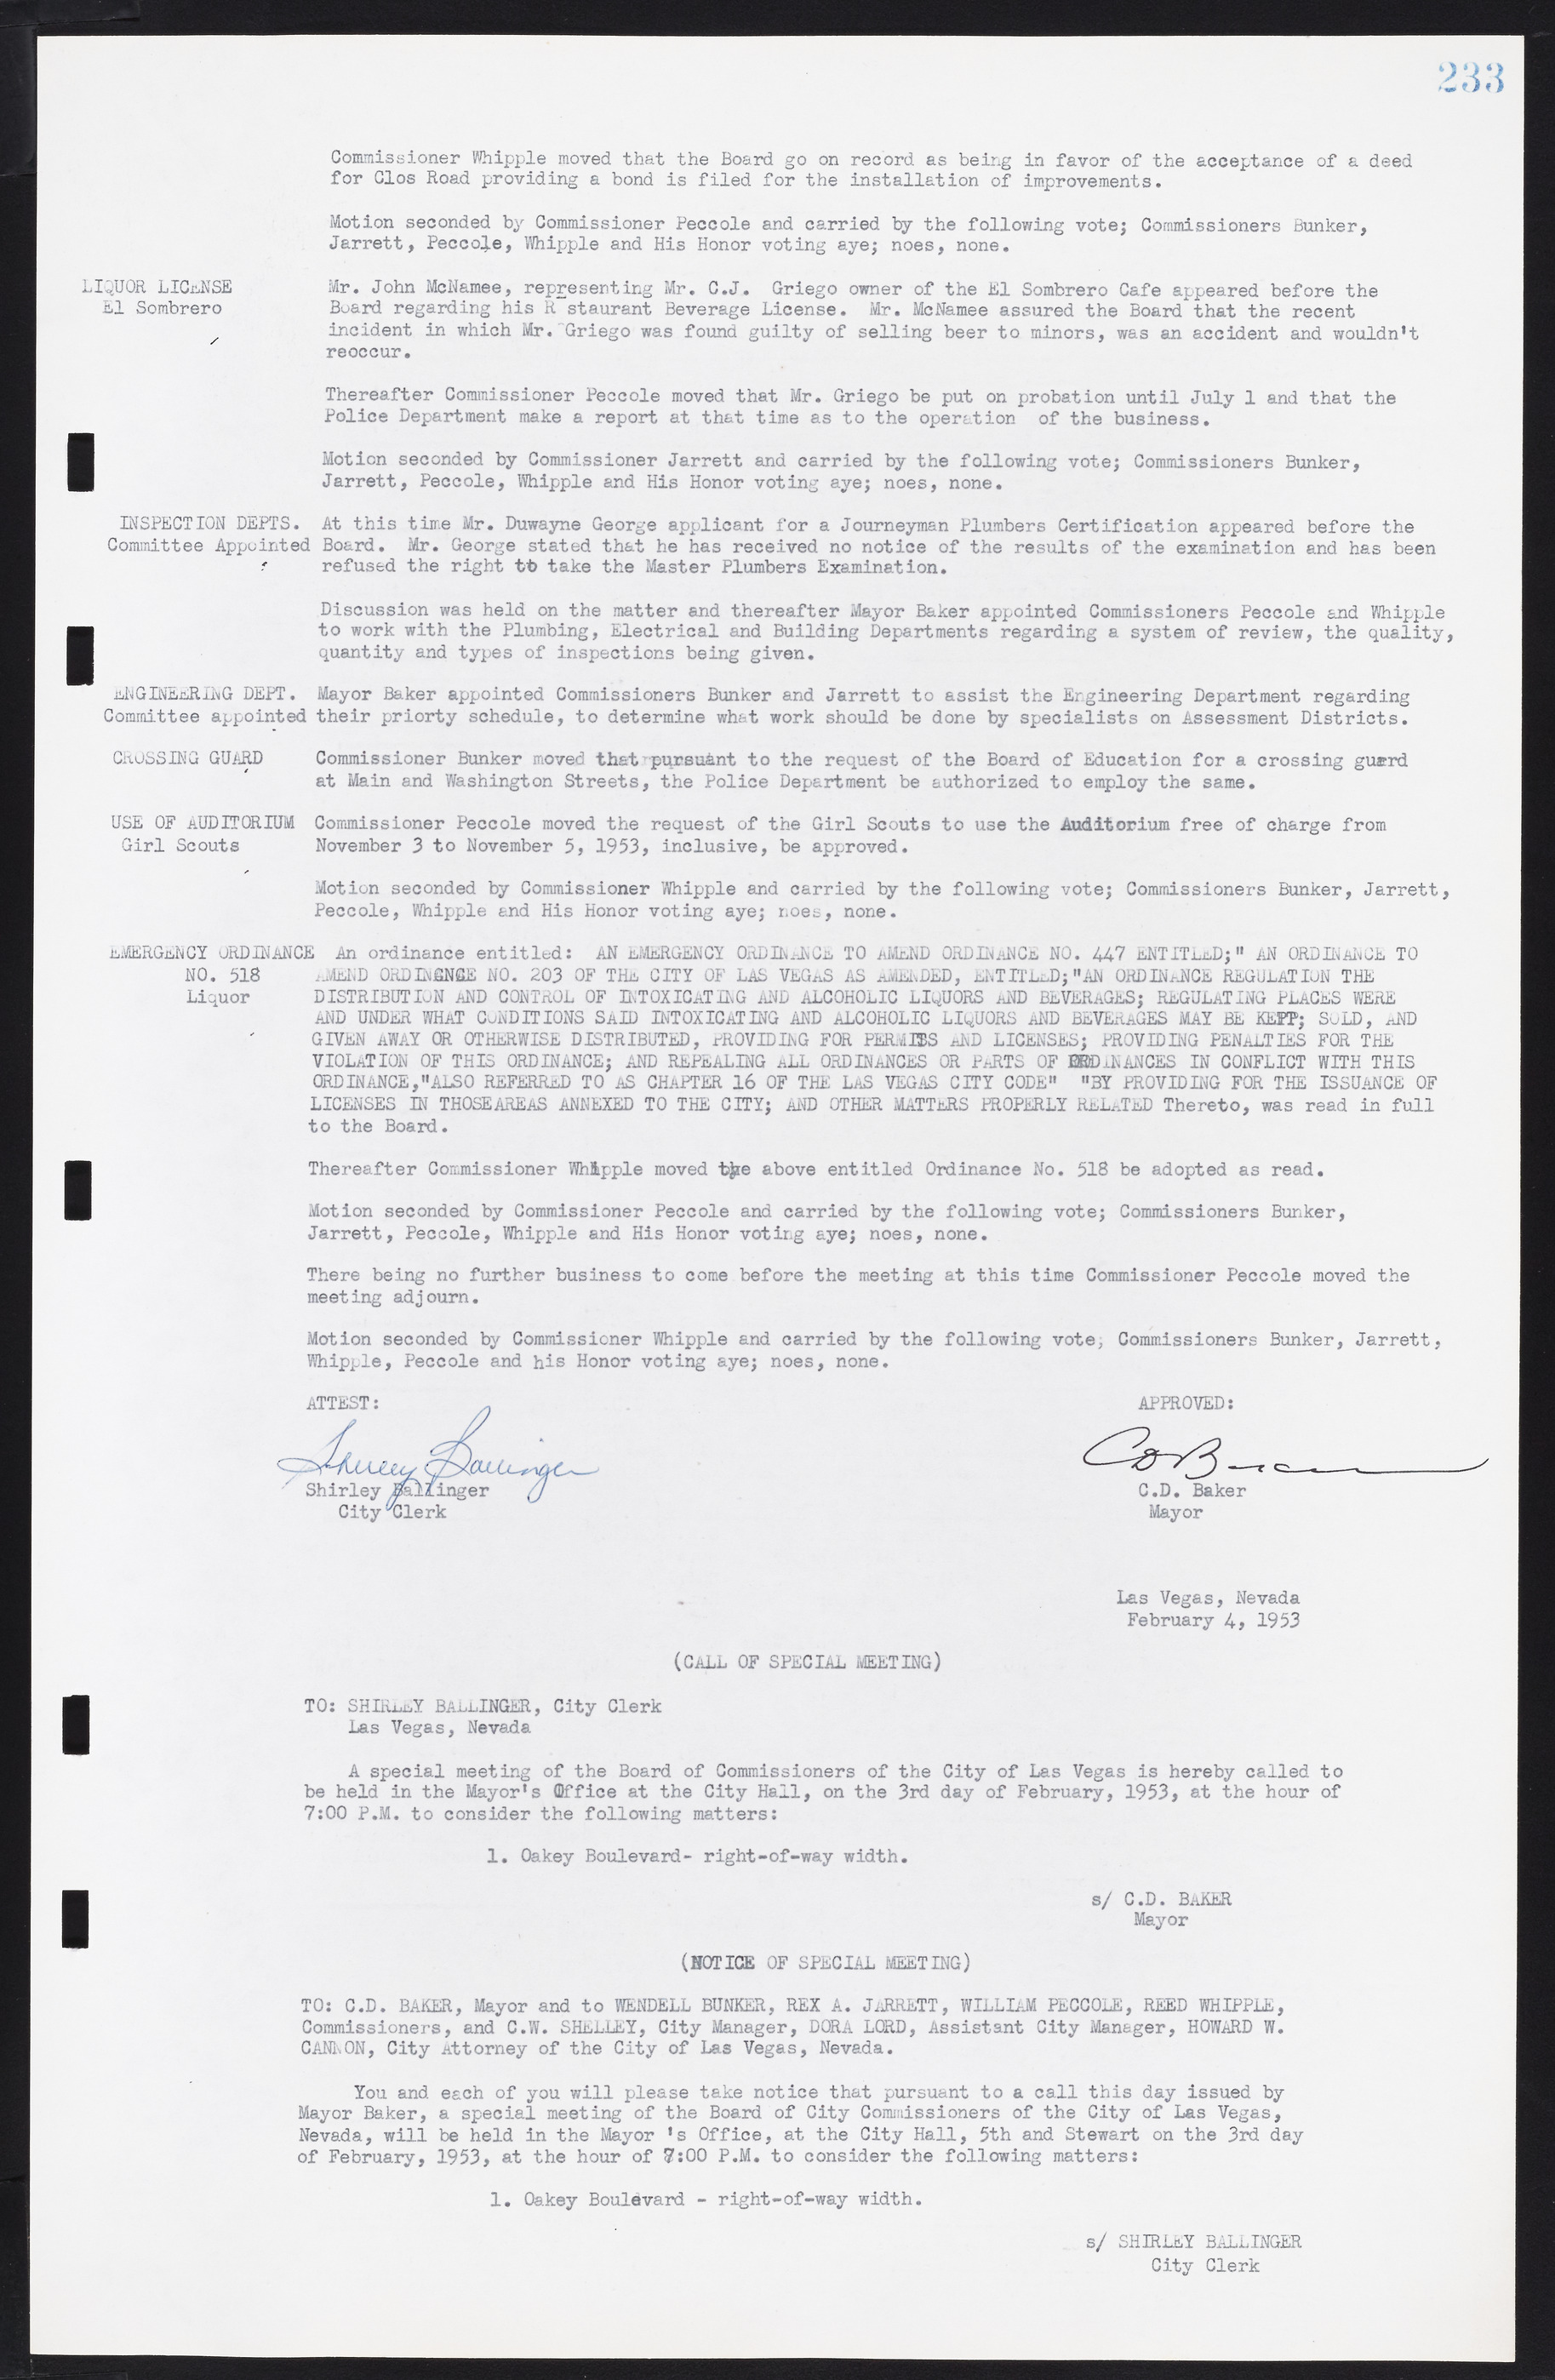 Las Vegas City Commission Minutes, May 26, 1952 to February 17, 1954, lvc000008-249